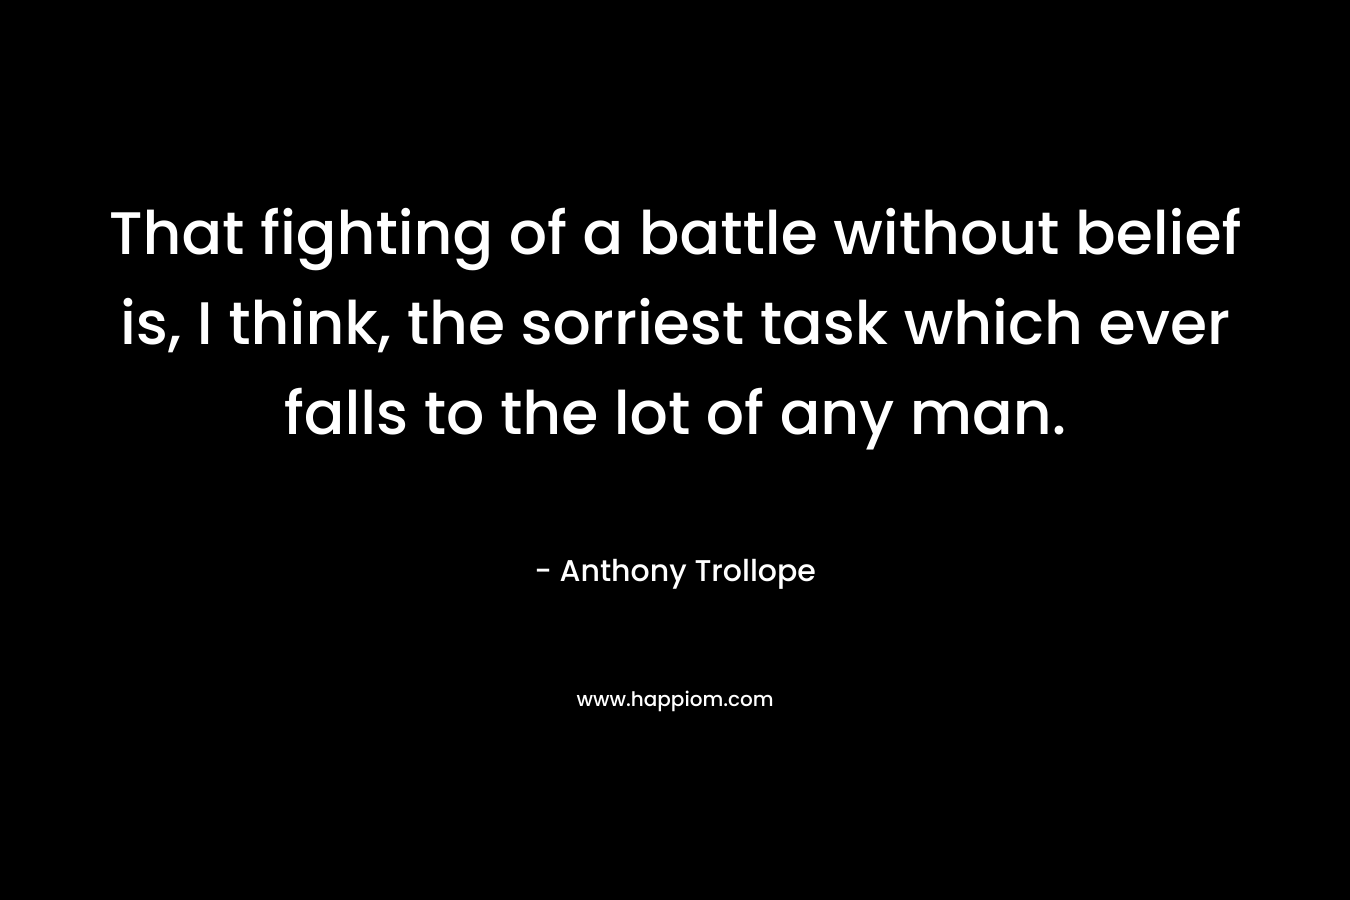 That fighting of a battle without belief is, I think, the sorriest task which ever falls to the lot of any man. – Anthony Trollope